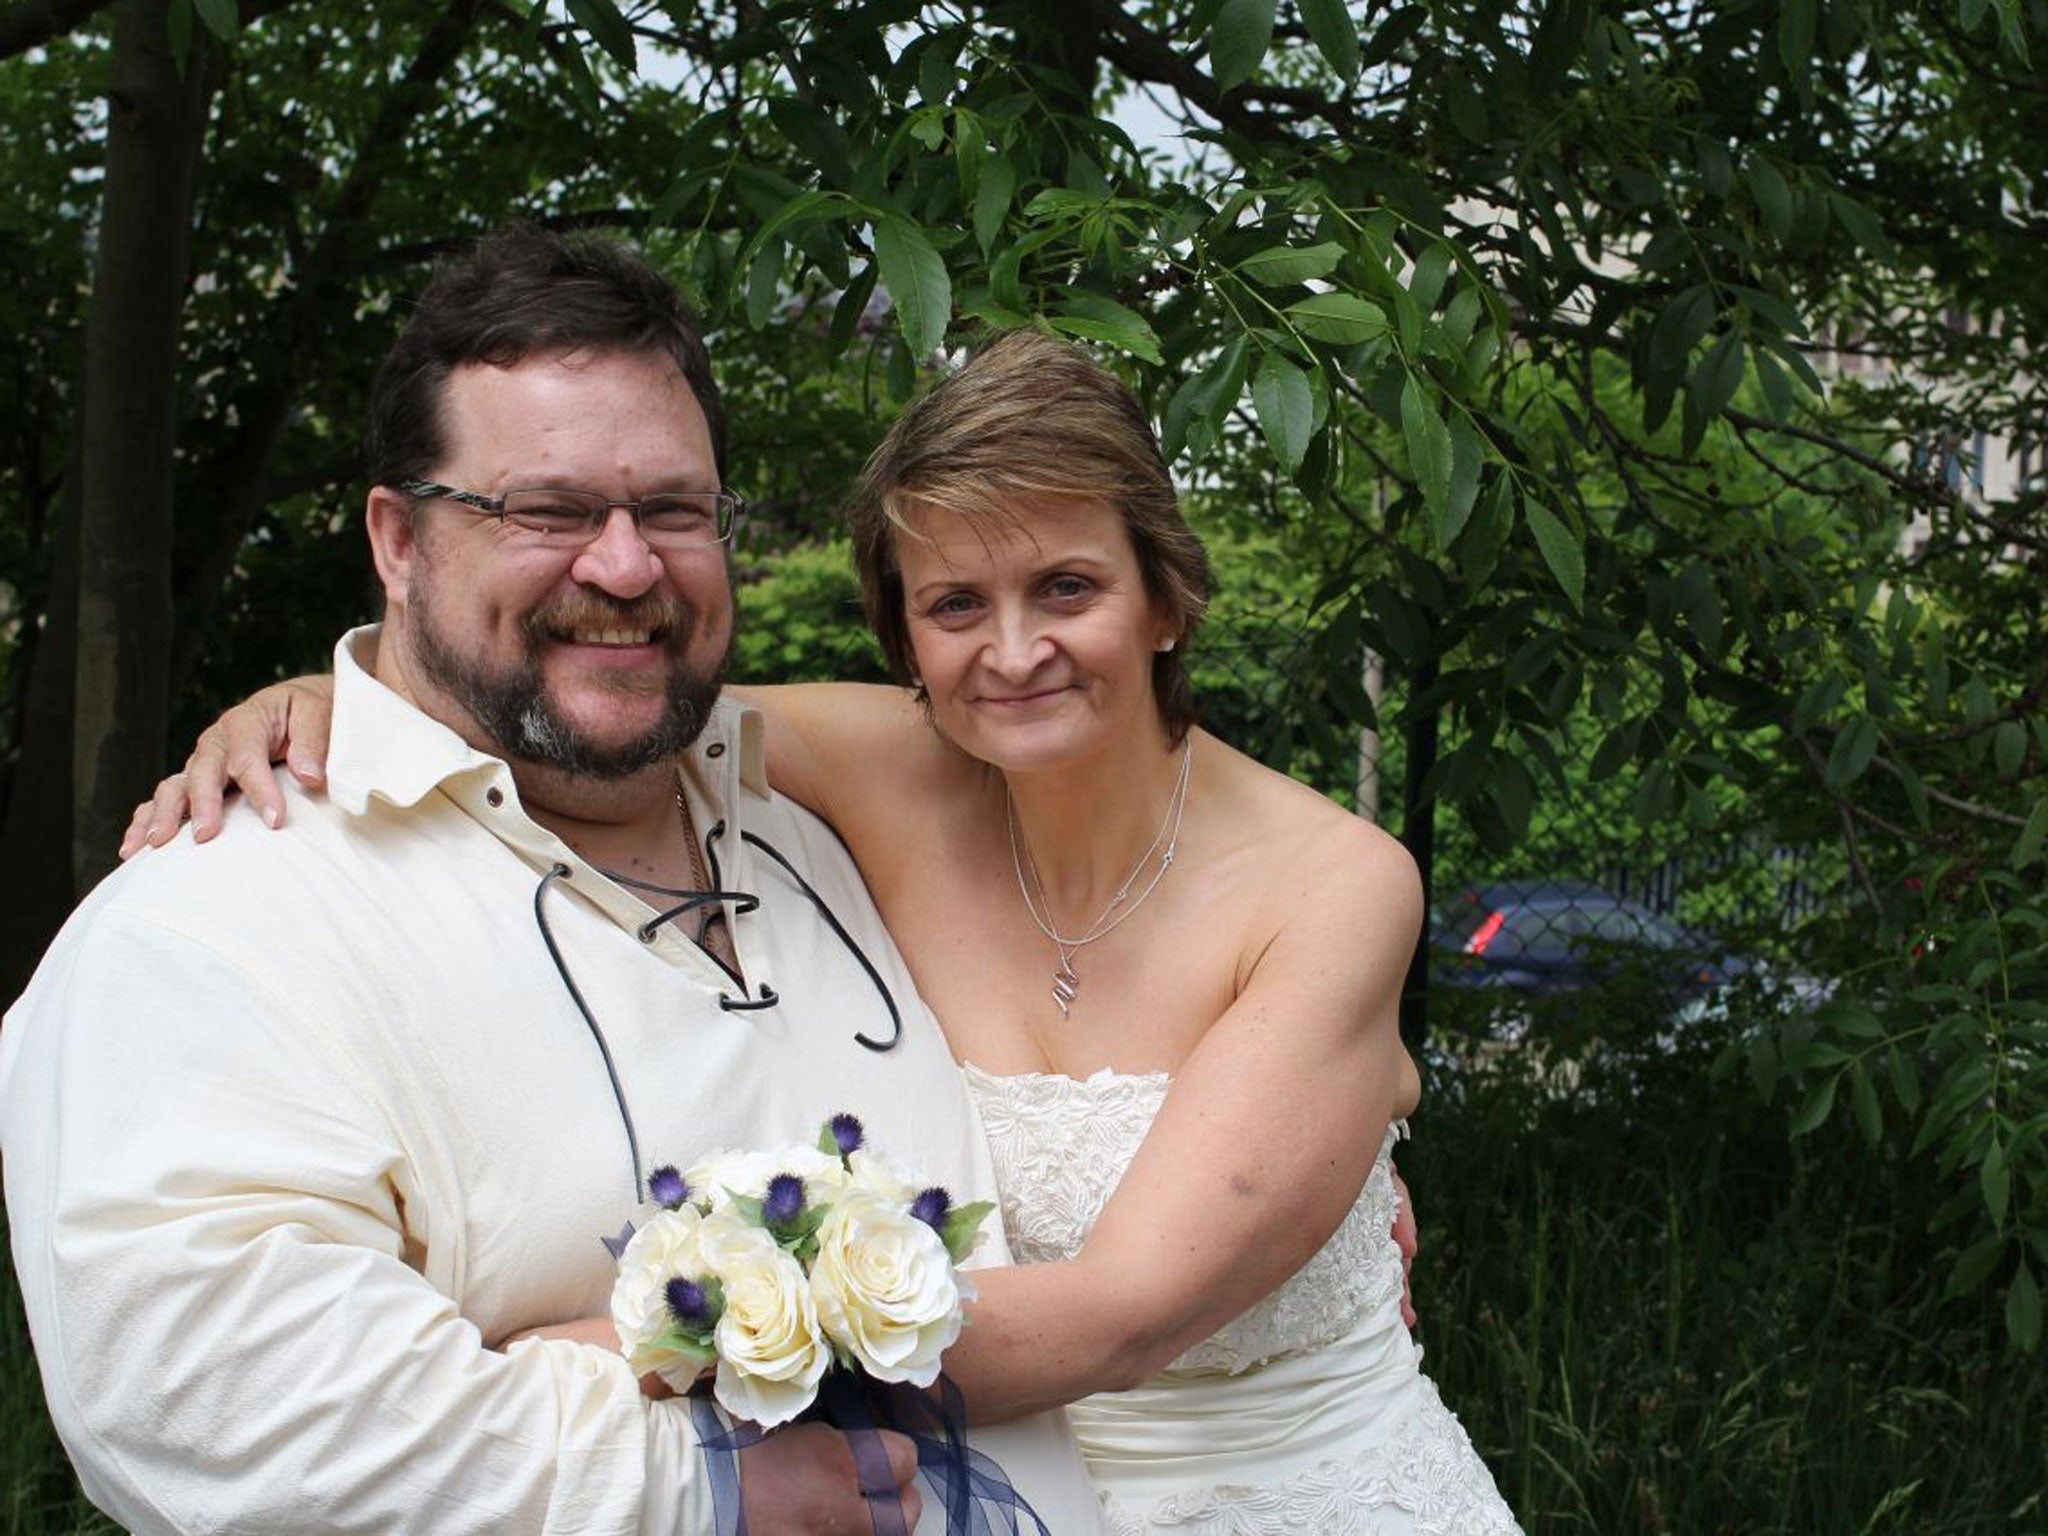 Ray and Patti Penn, who married in June 2013, were helped by Christians Against Poverty, a debt charity